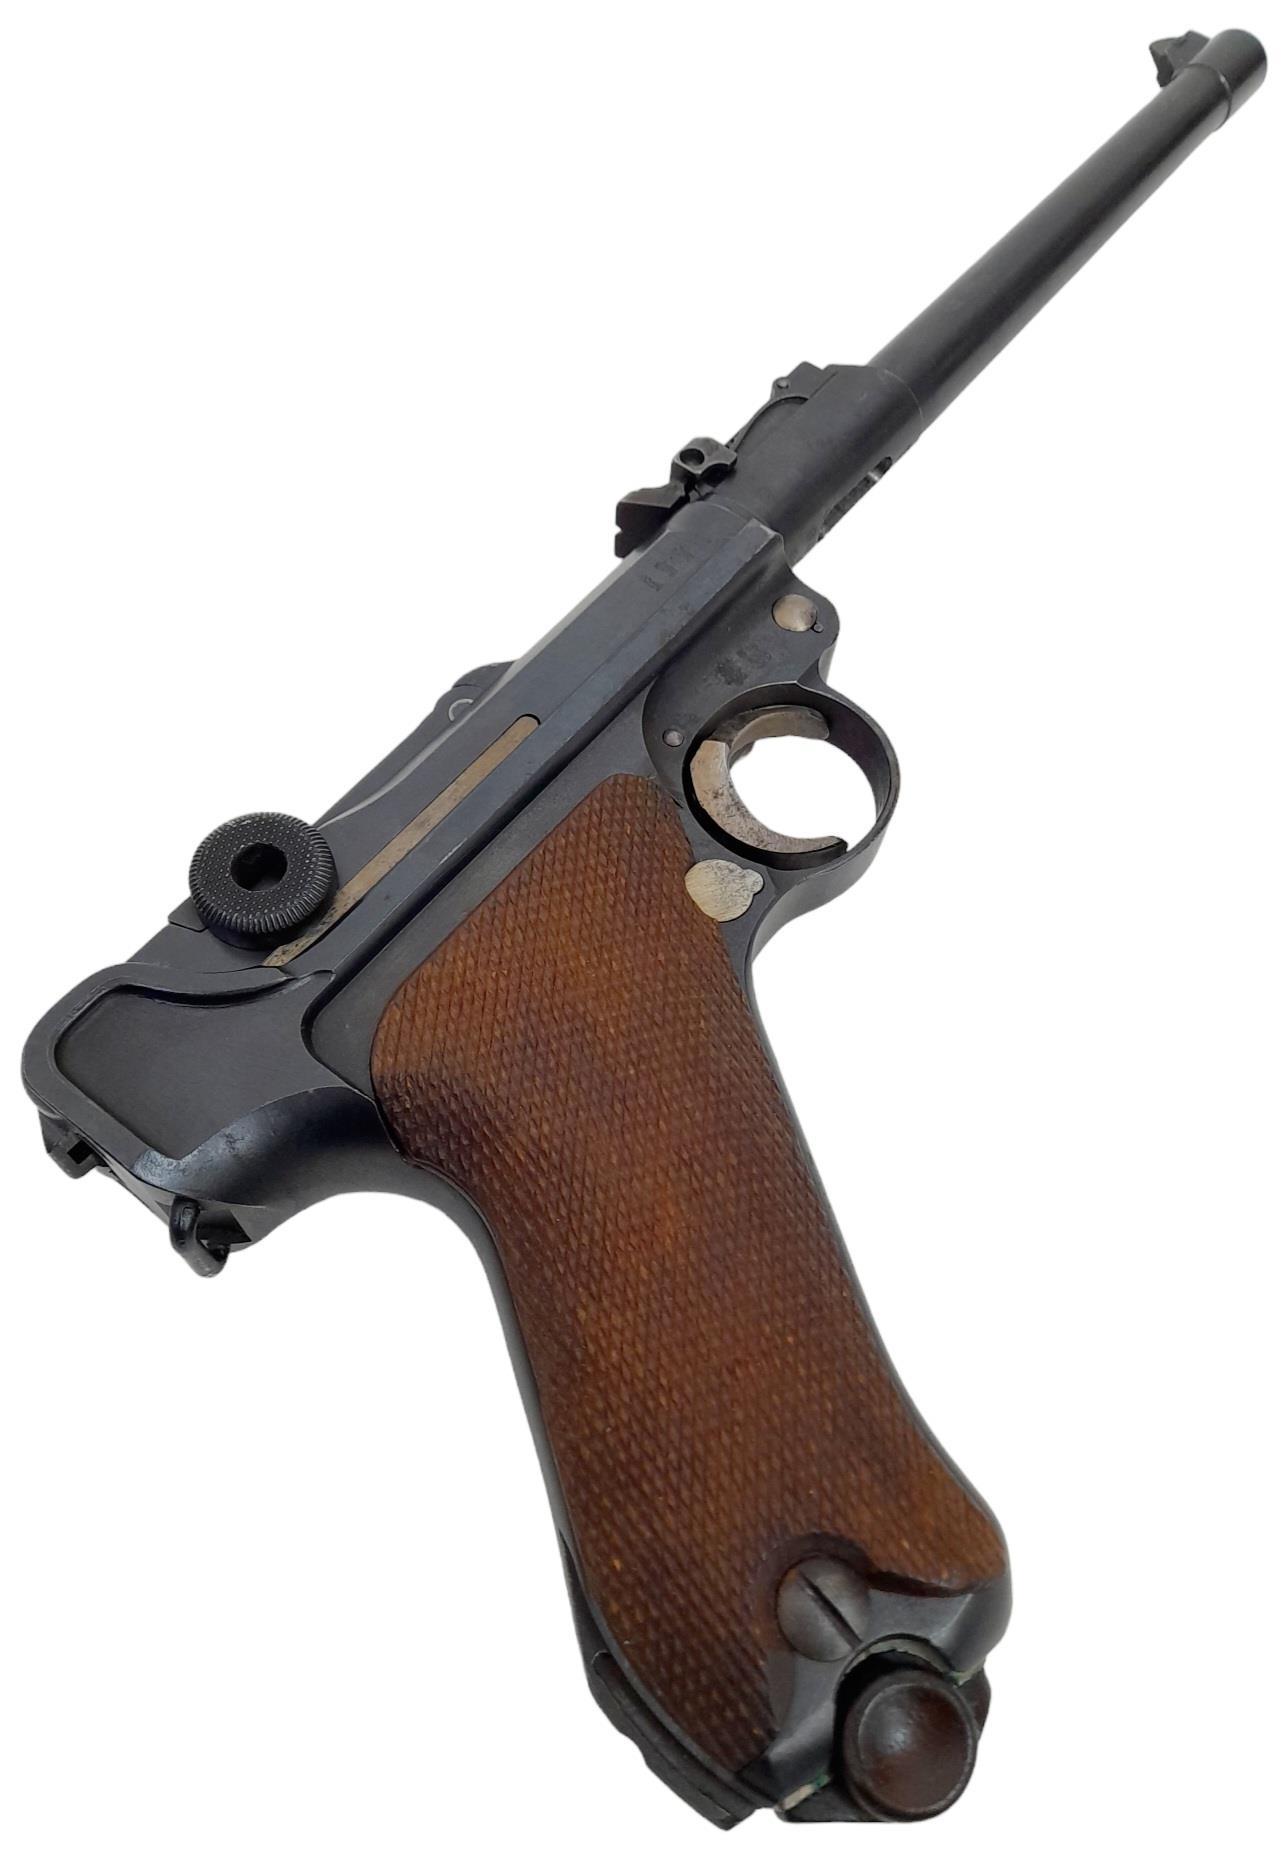 A Deactivated Antique 1917 German Luger Pistol. Matching serial numbers. This 9mm classic pistol - Bild 2 aus 6